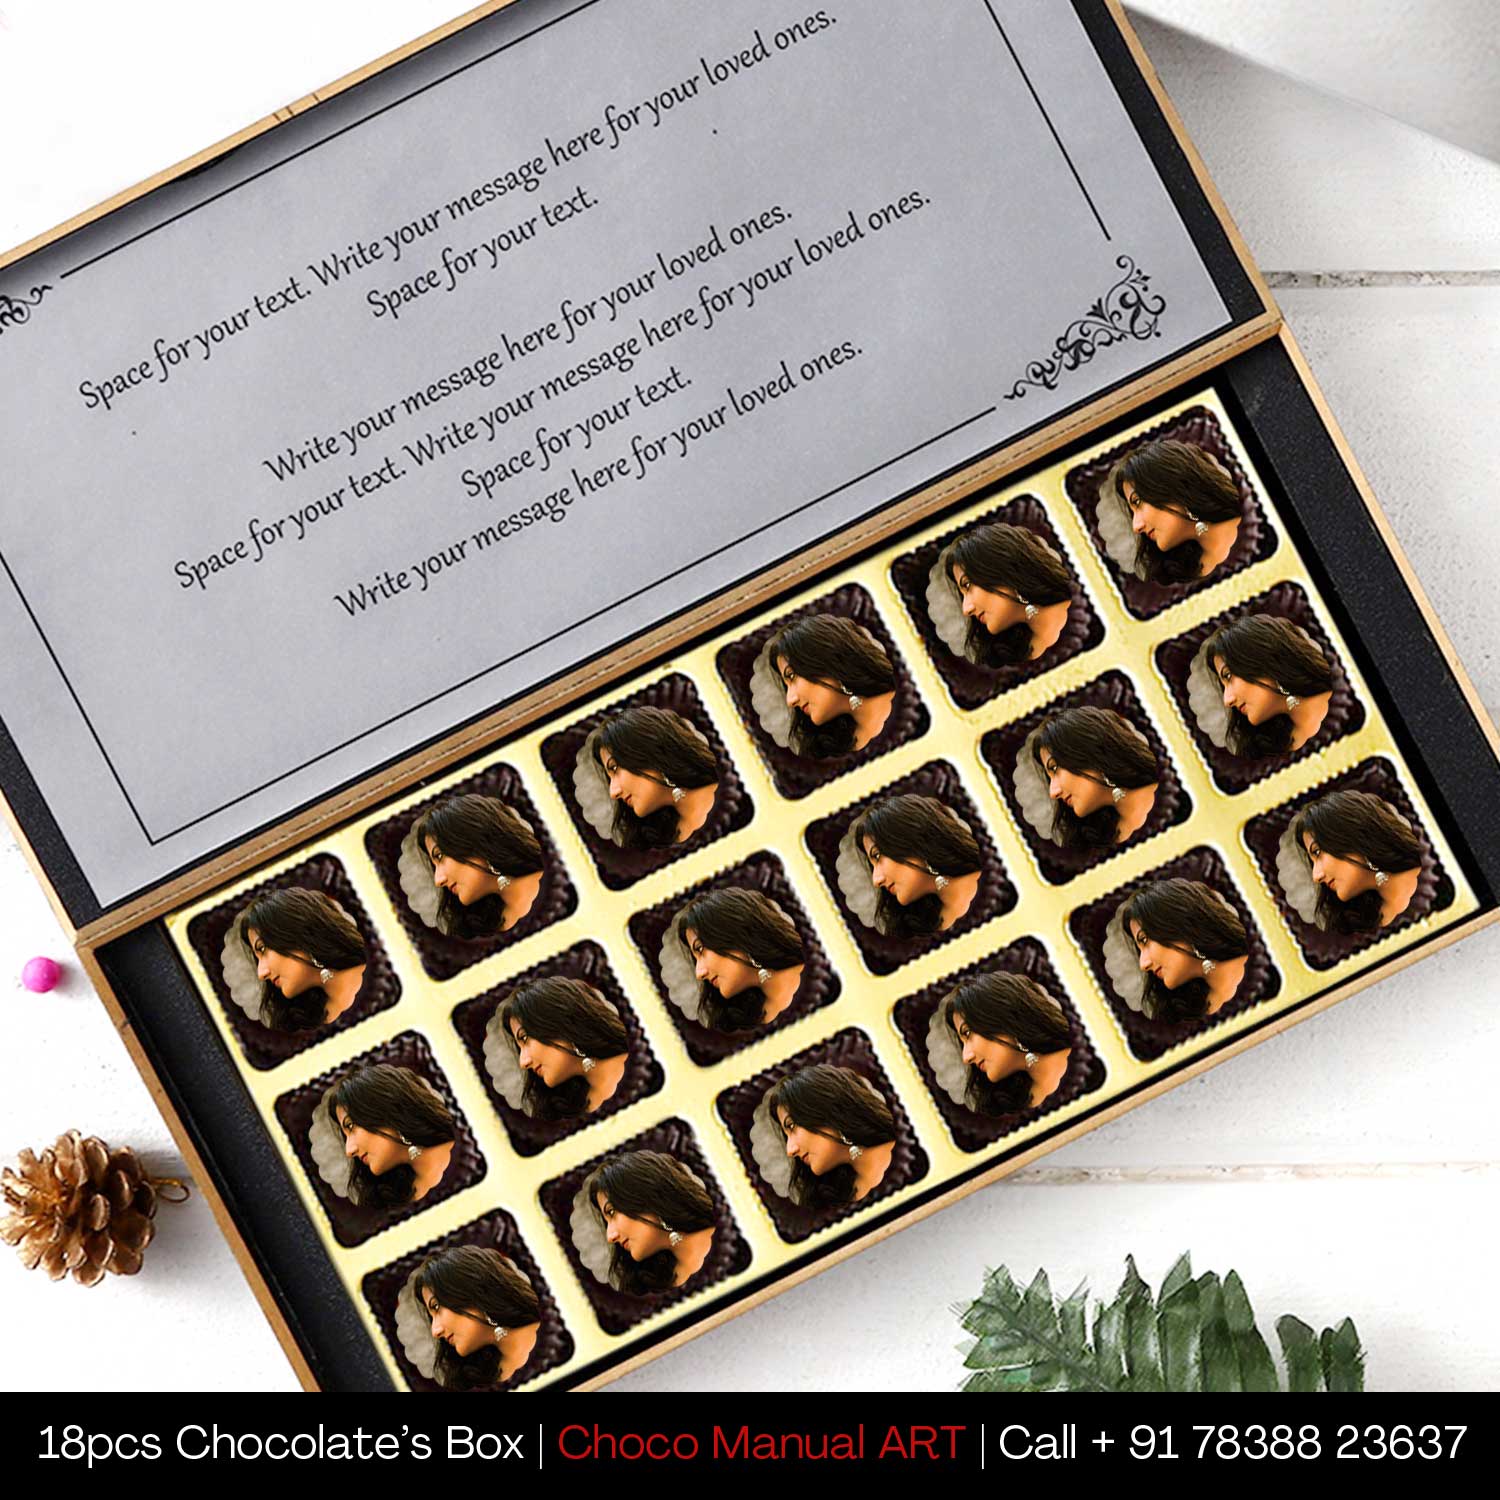 personalised chocolates with names personalized chocolates for birthday customized chocolate gifts personalized chocolate gift box personalised chocolates with photo india customised chocolates near me customised chocolate wrapper